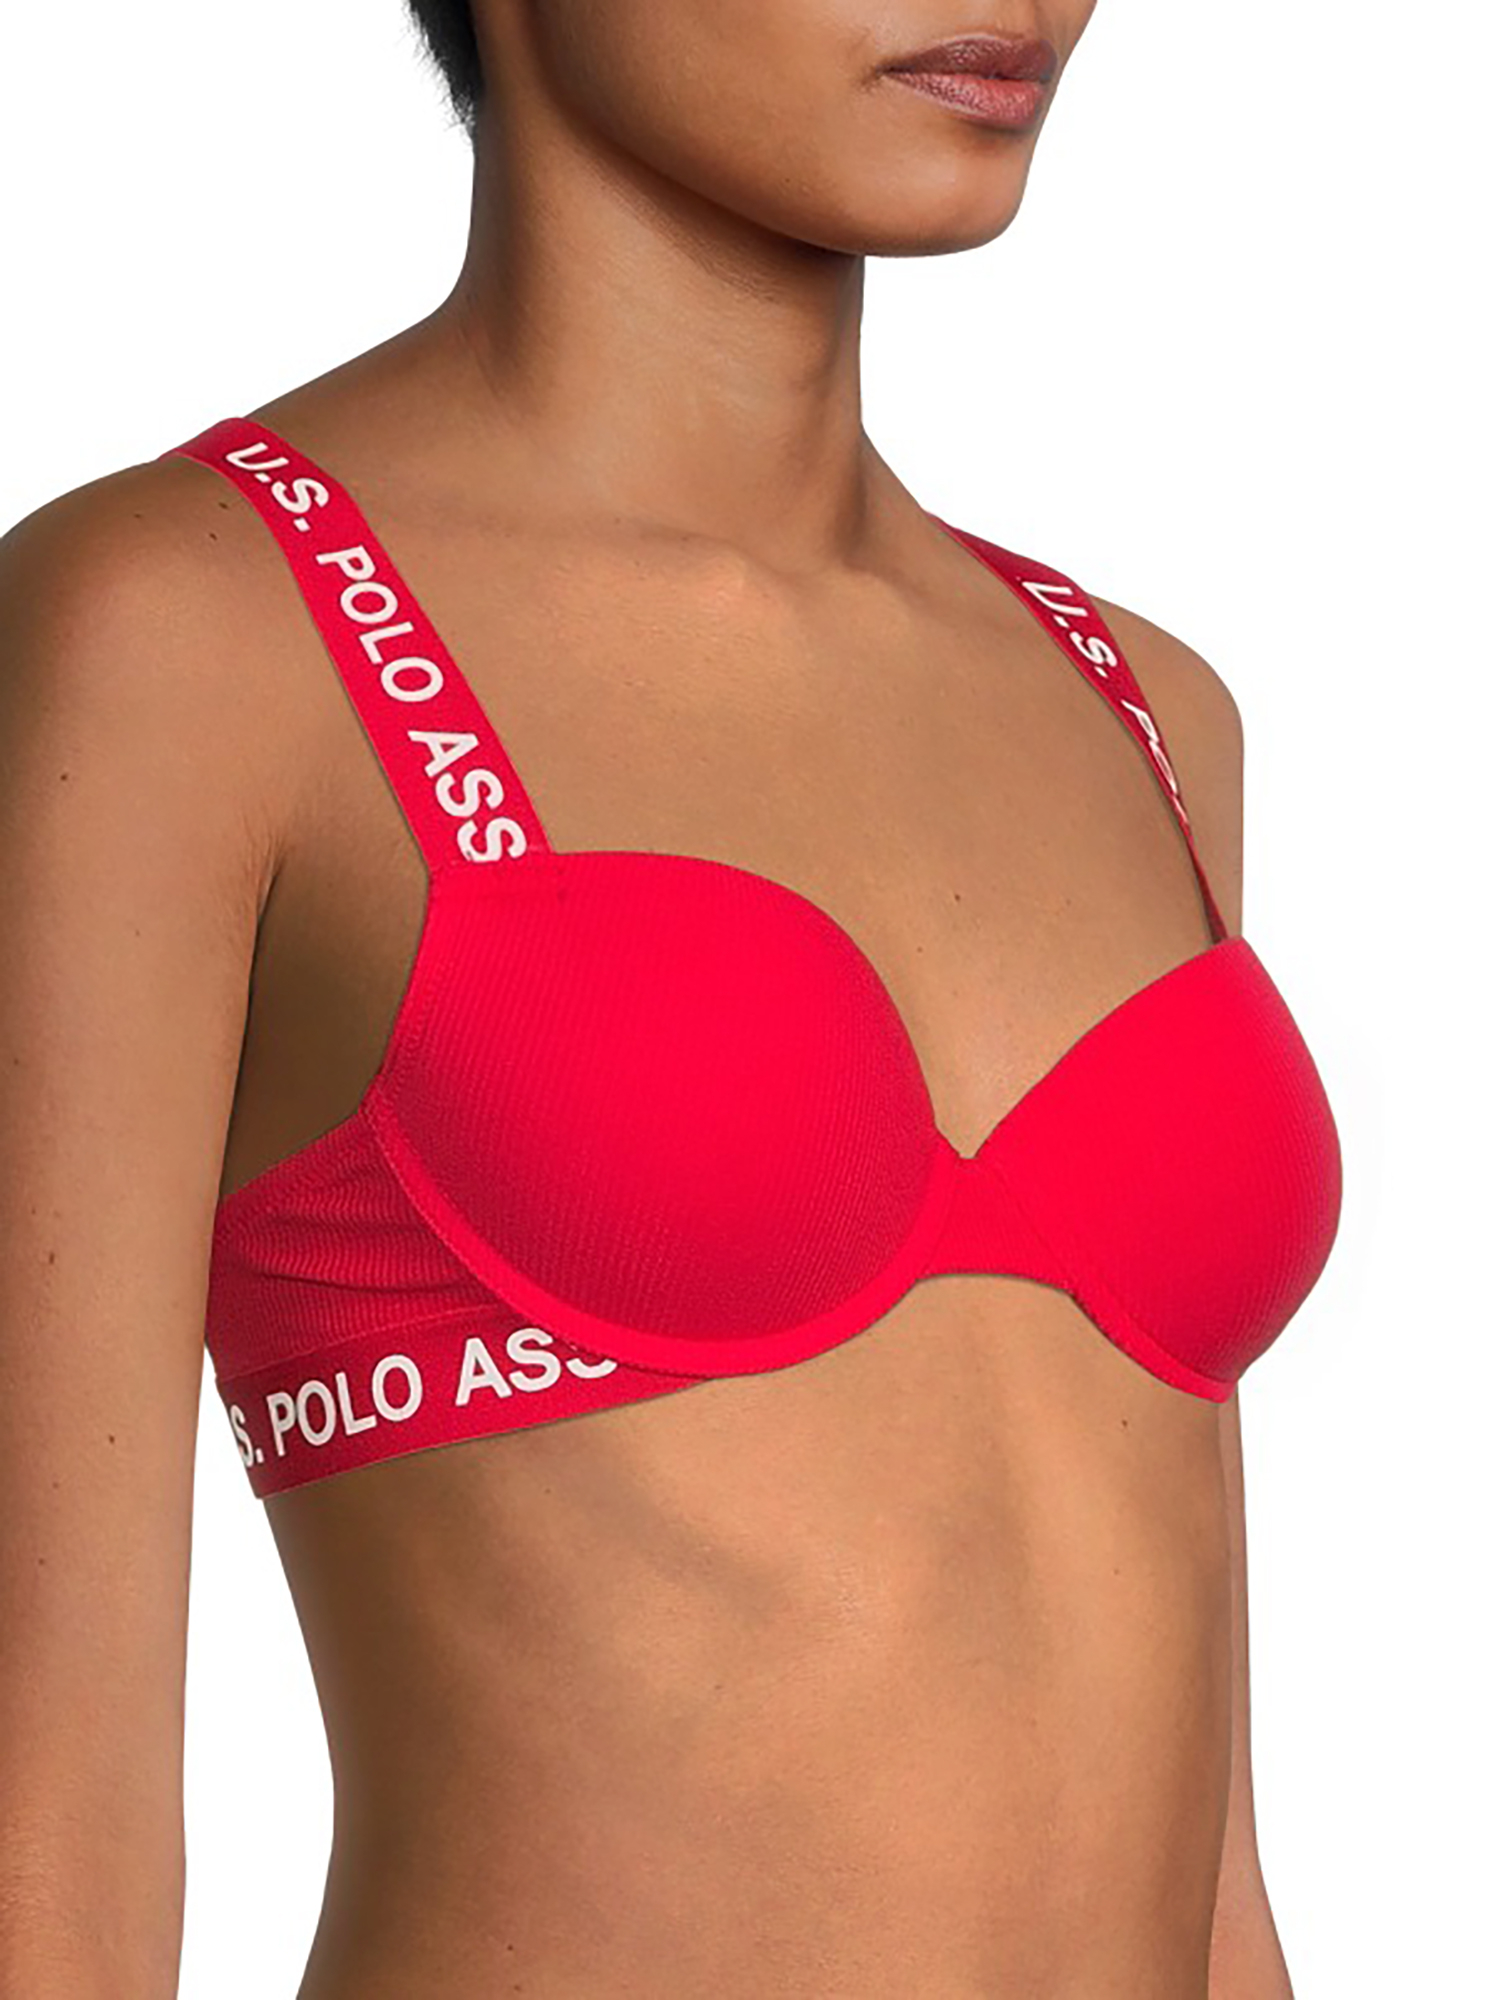 U.S. Polo Assn. Women's 2 Pack Tag-Free Ribbed Cotton Spandex Push Up Bra Set - image 4 of 4